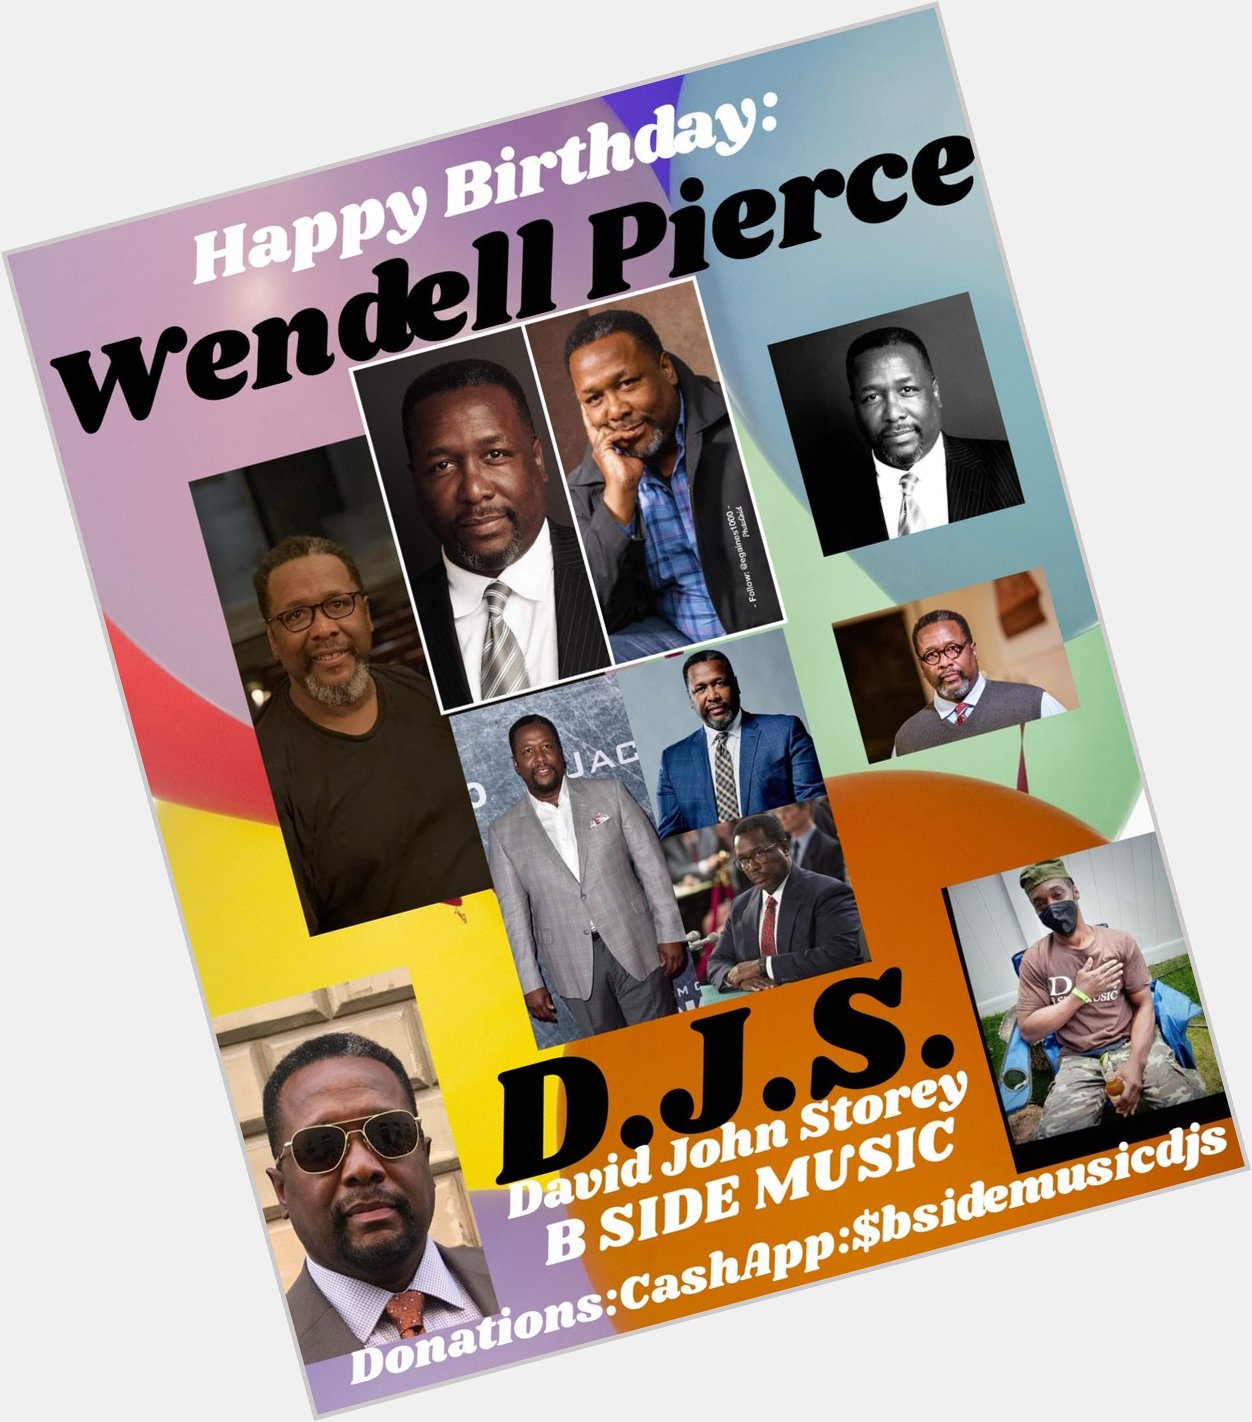 I(D.J.S.)\"B SIDE\" saying Happy Birthday to Actor: \"WENDELL PIERCE\"!!!! 